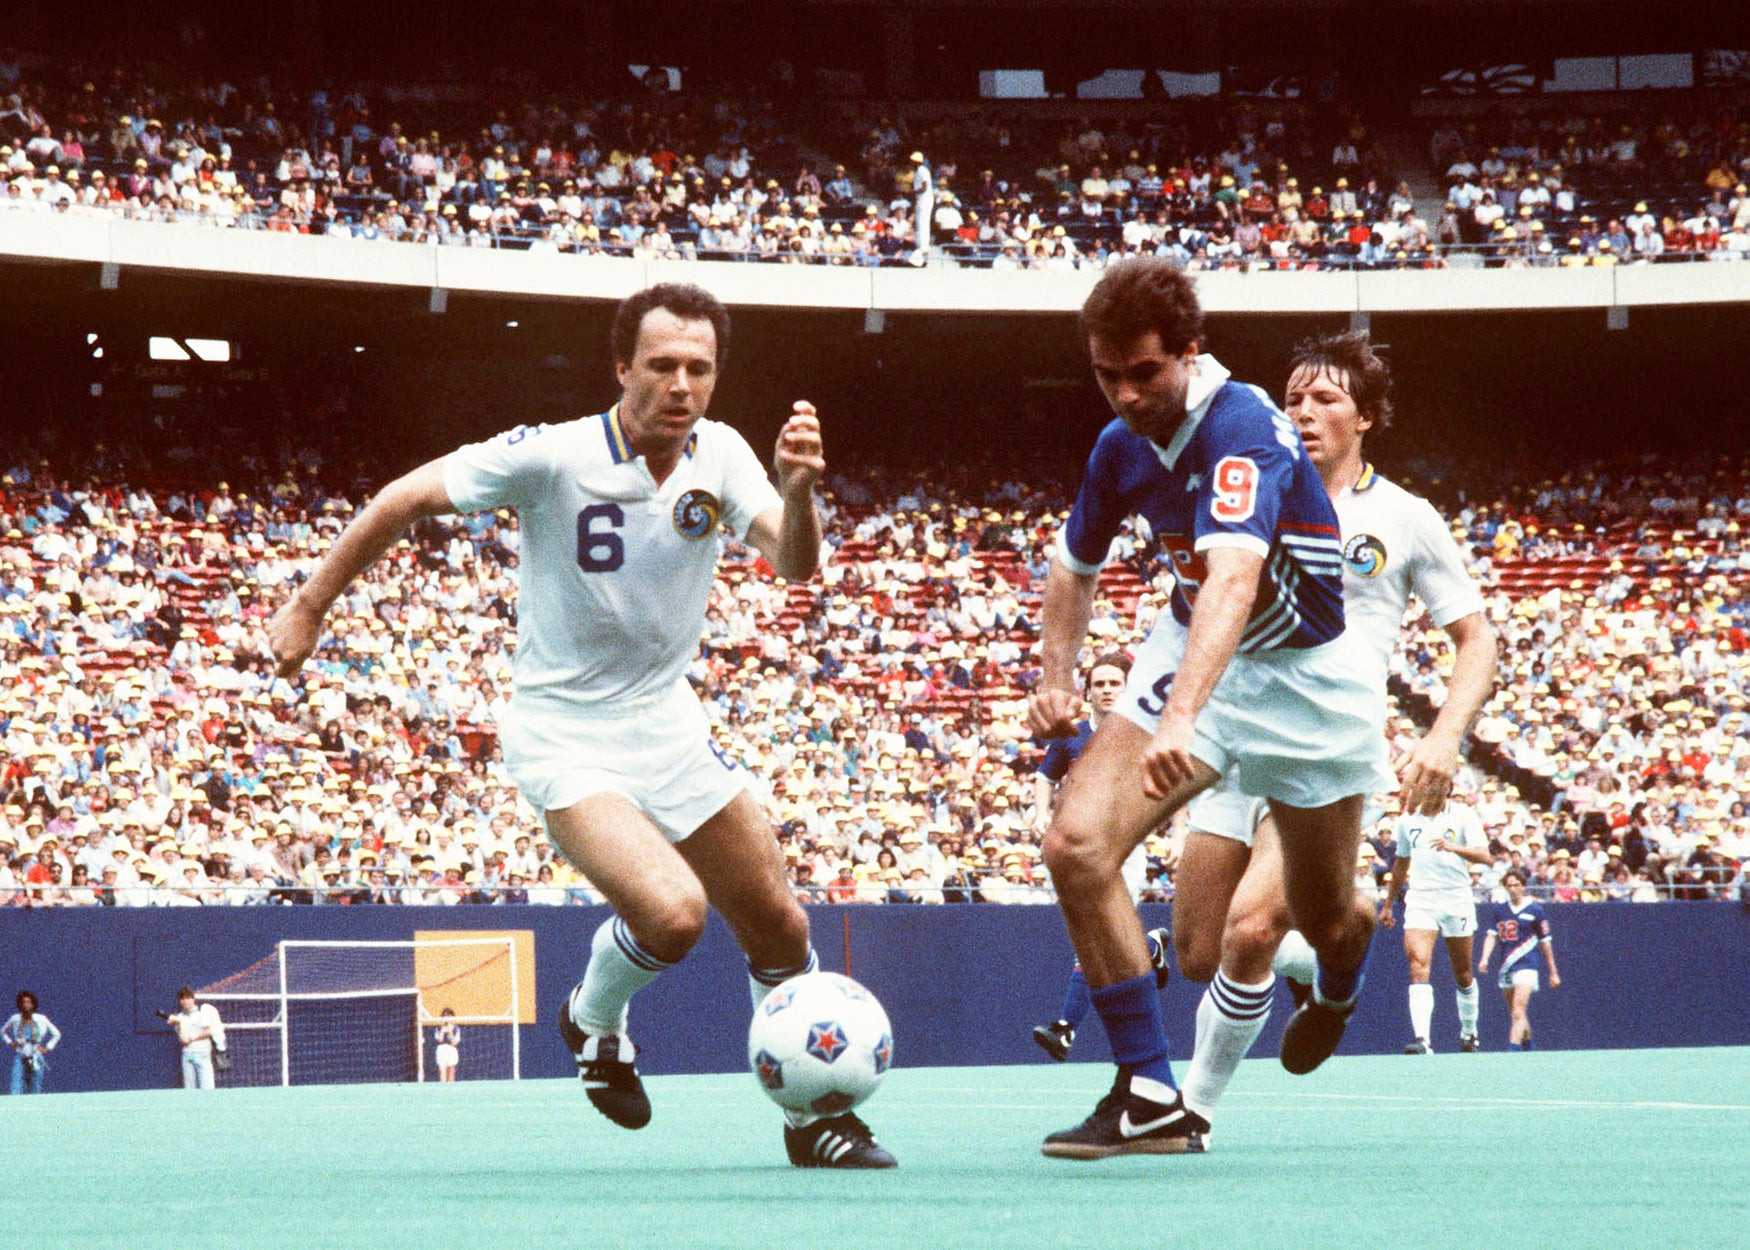 Beckenbauer headed to the US to play for New York Cosmos late in his career